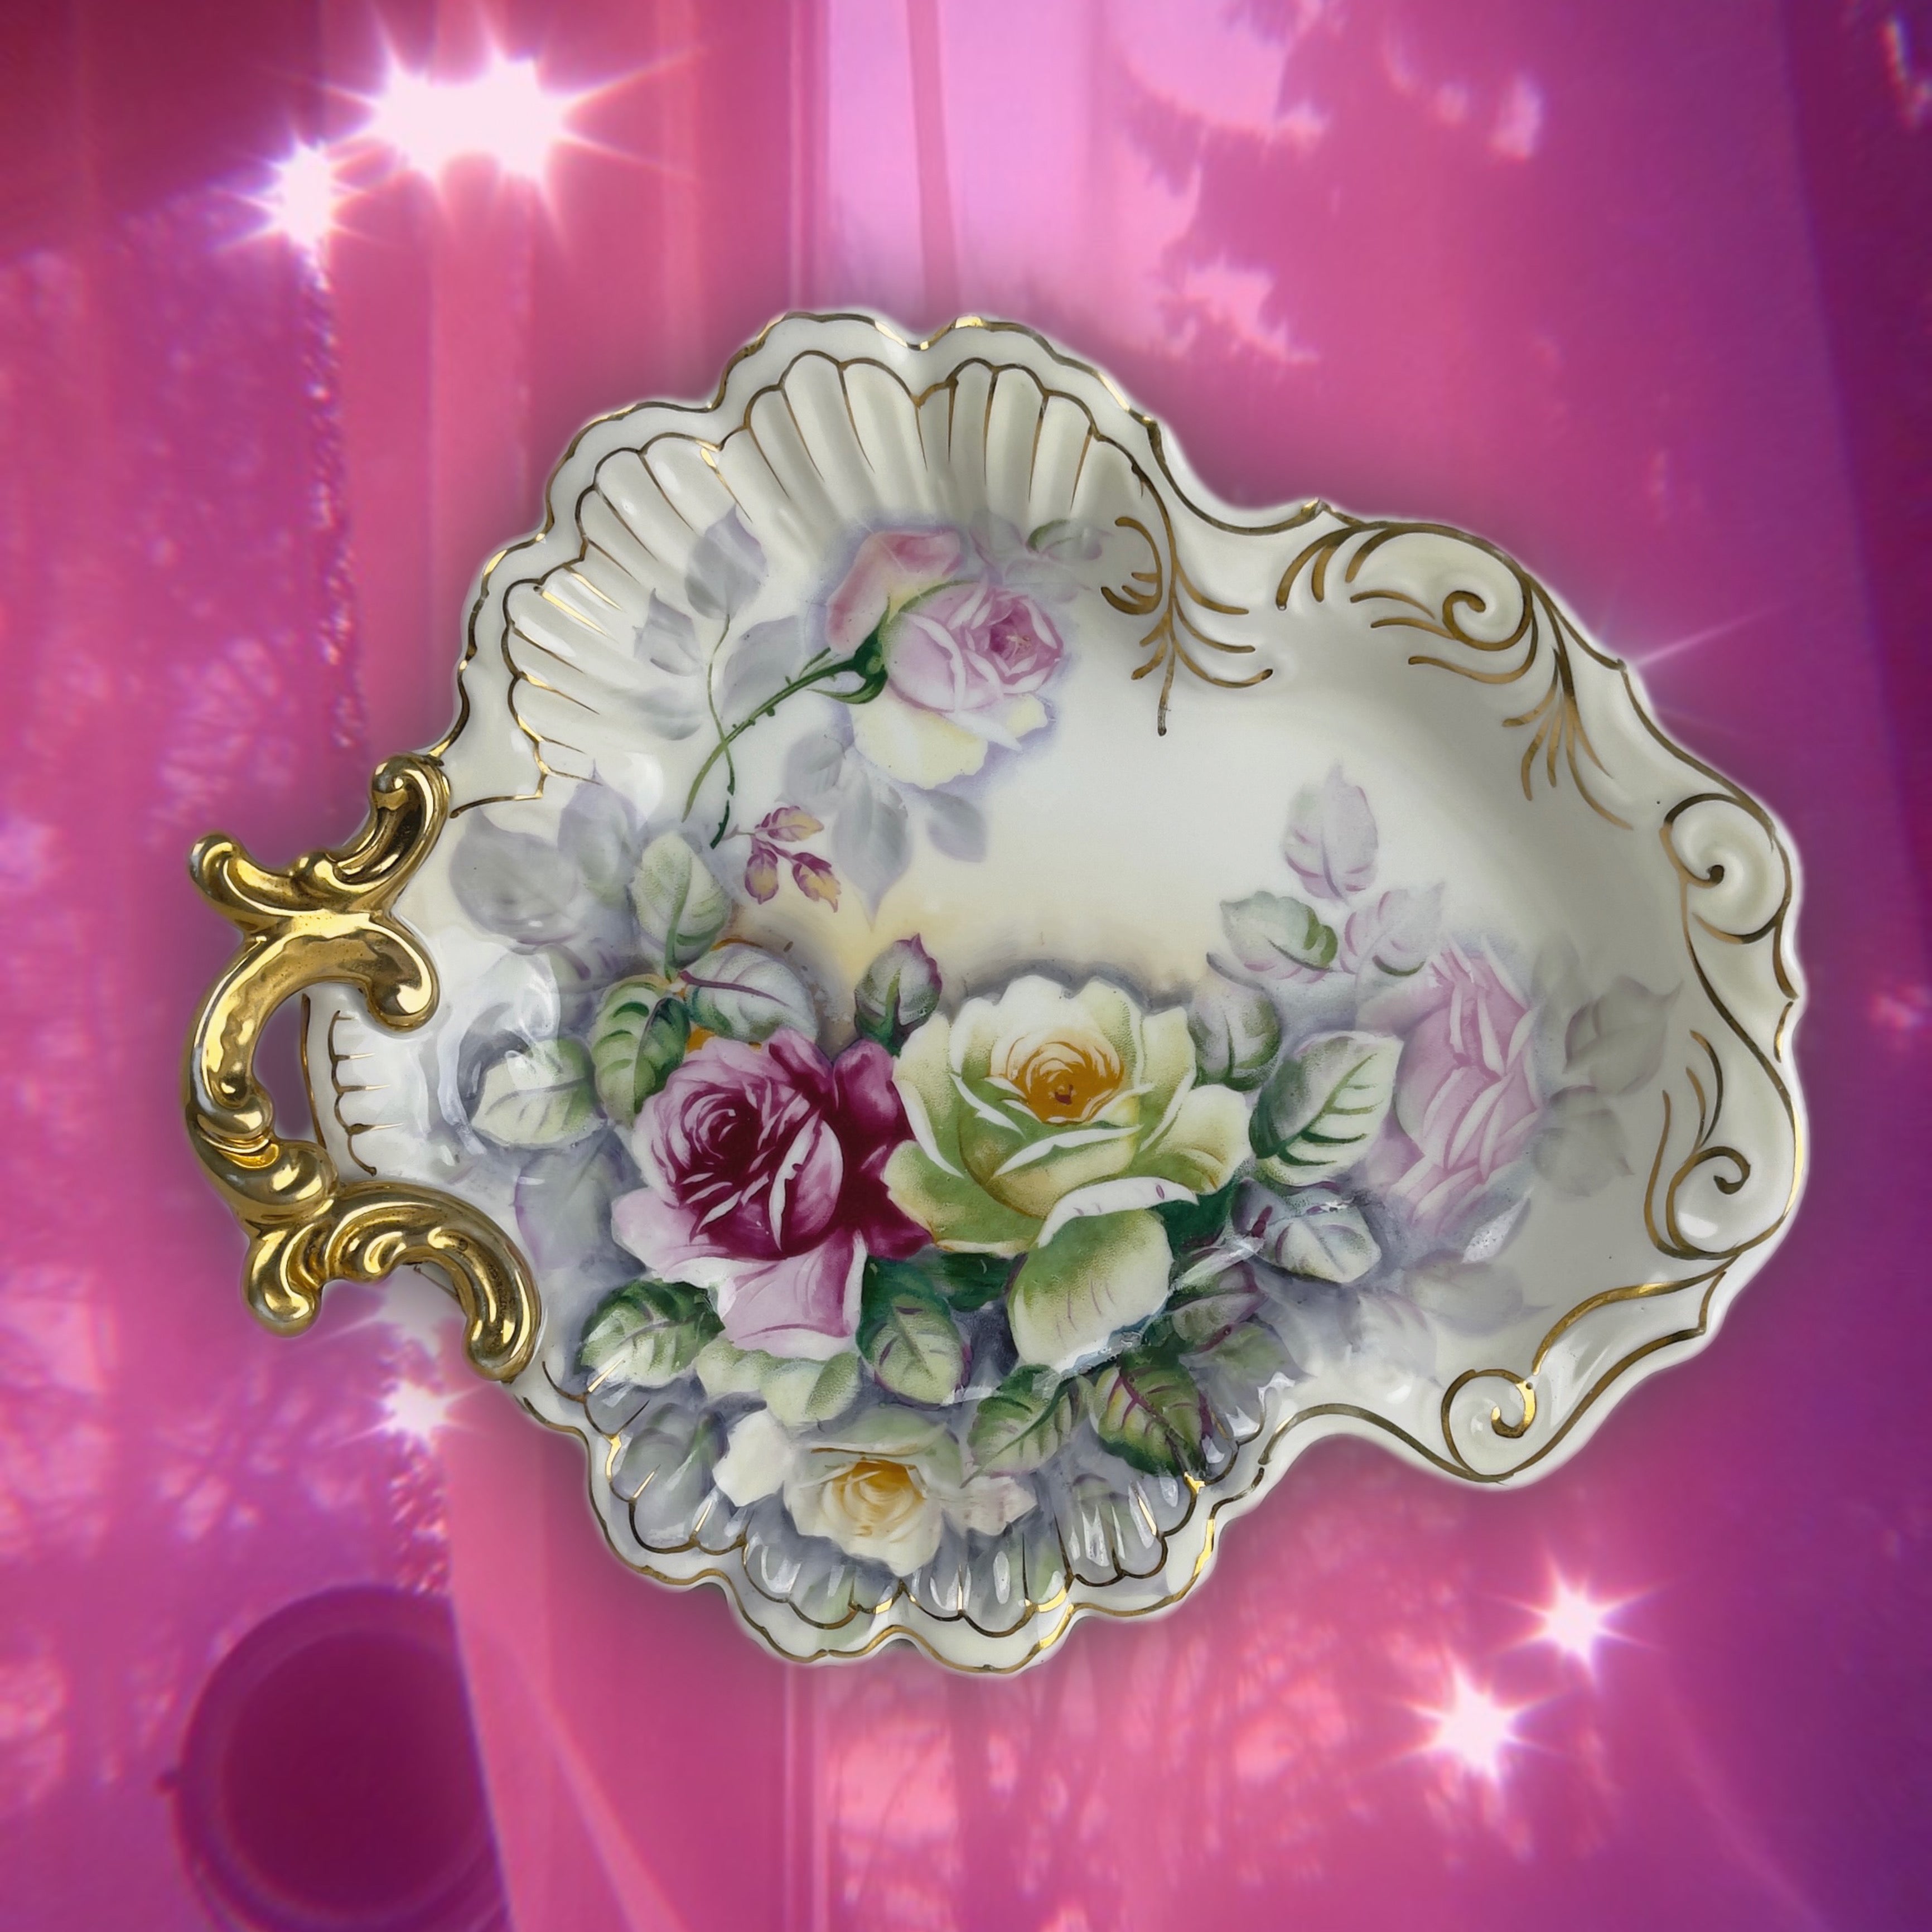 Victorian Blooming Rose Porcelain Candy Dish